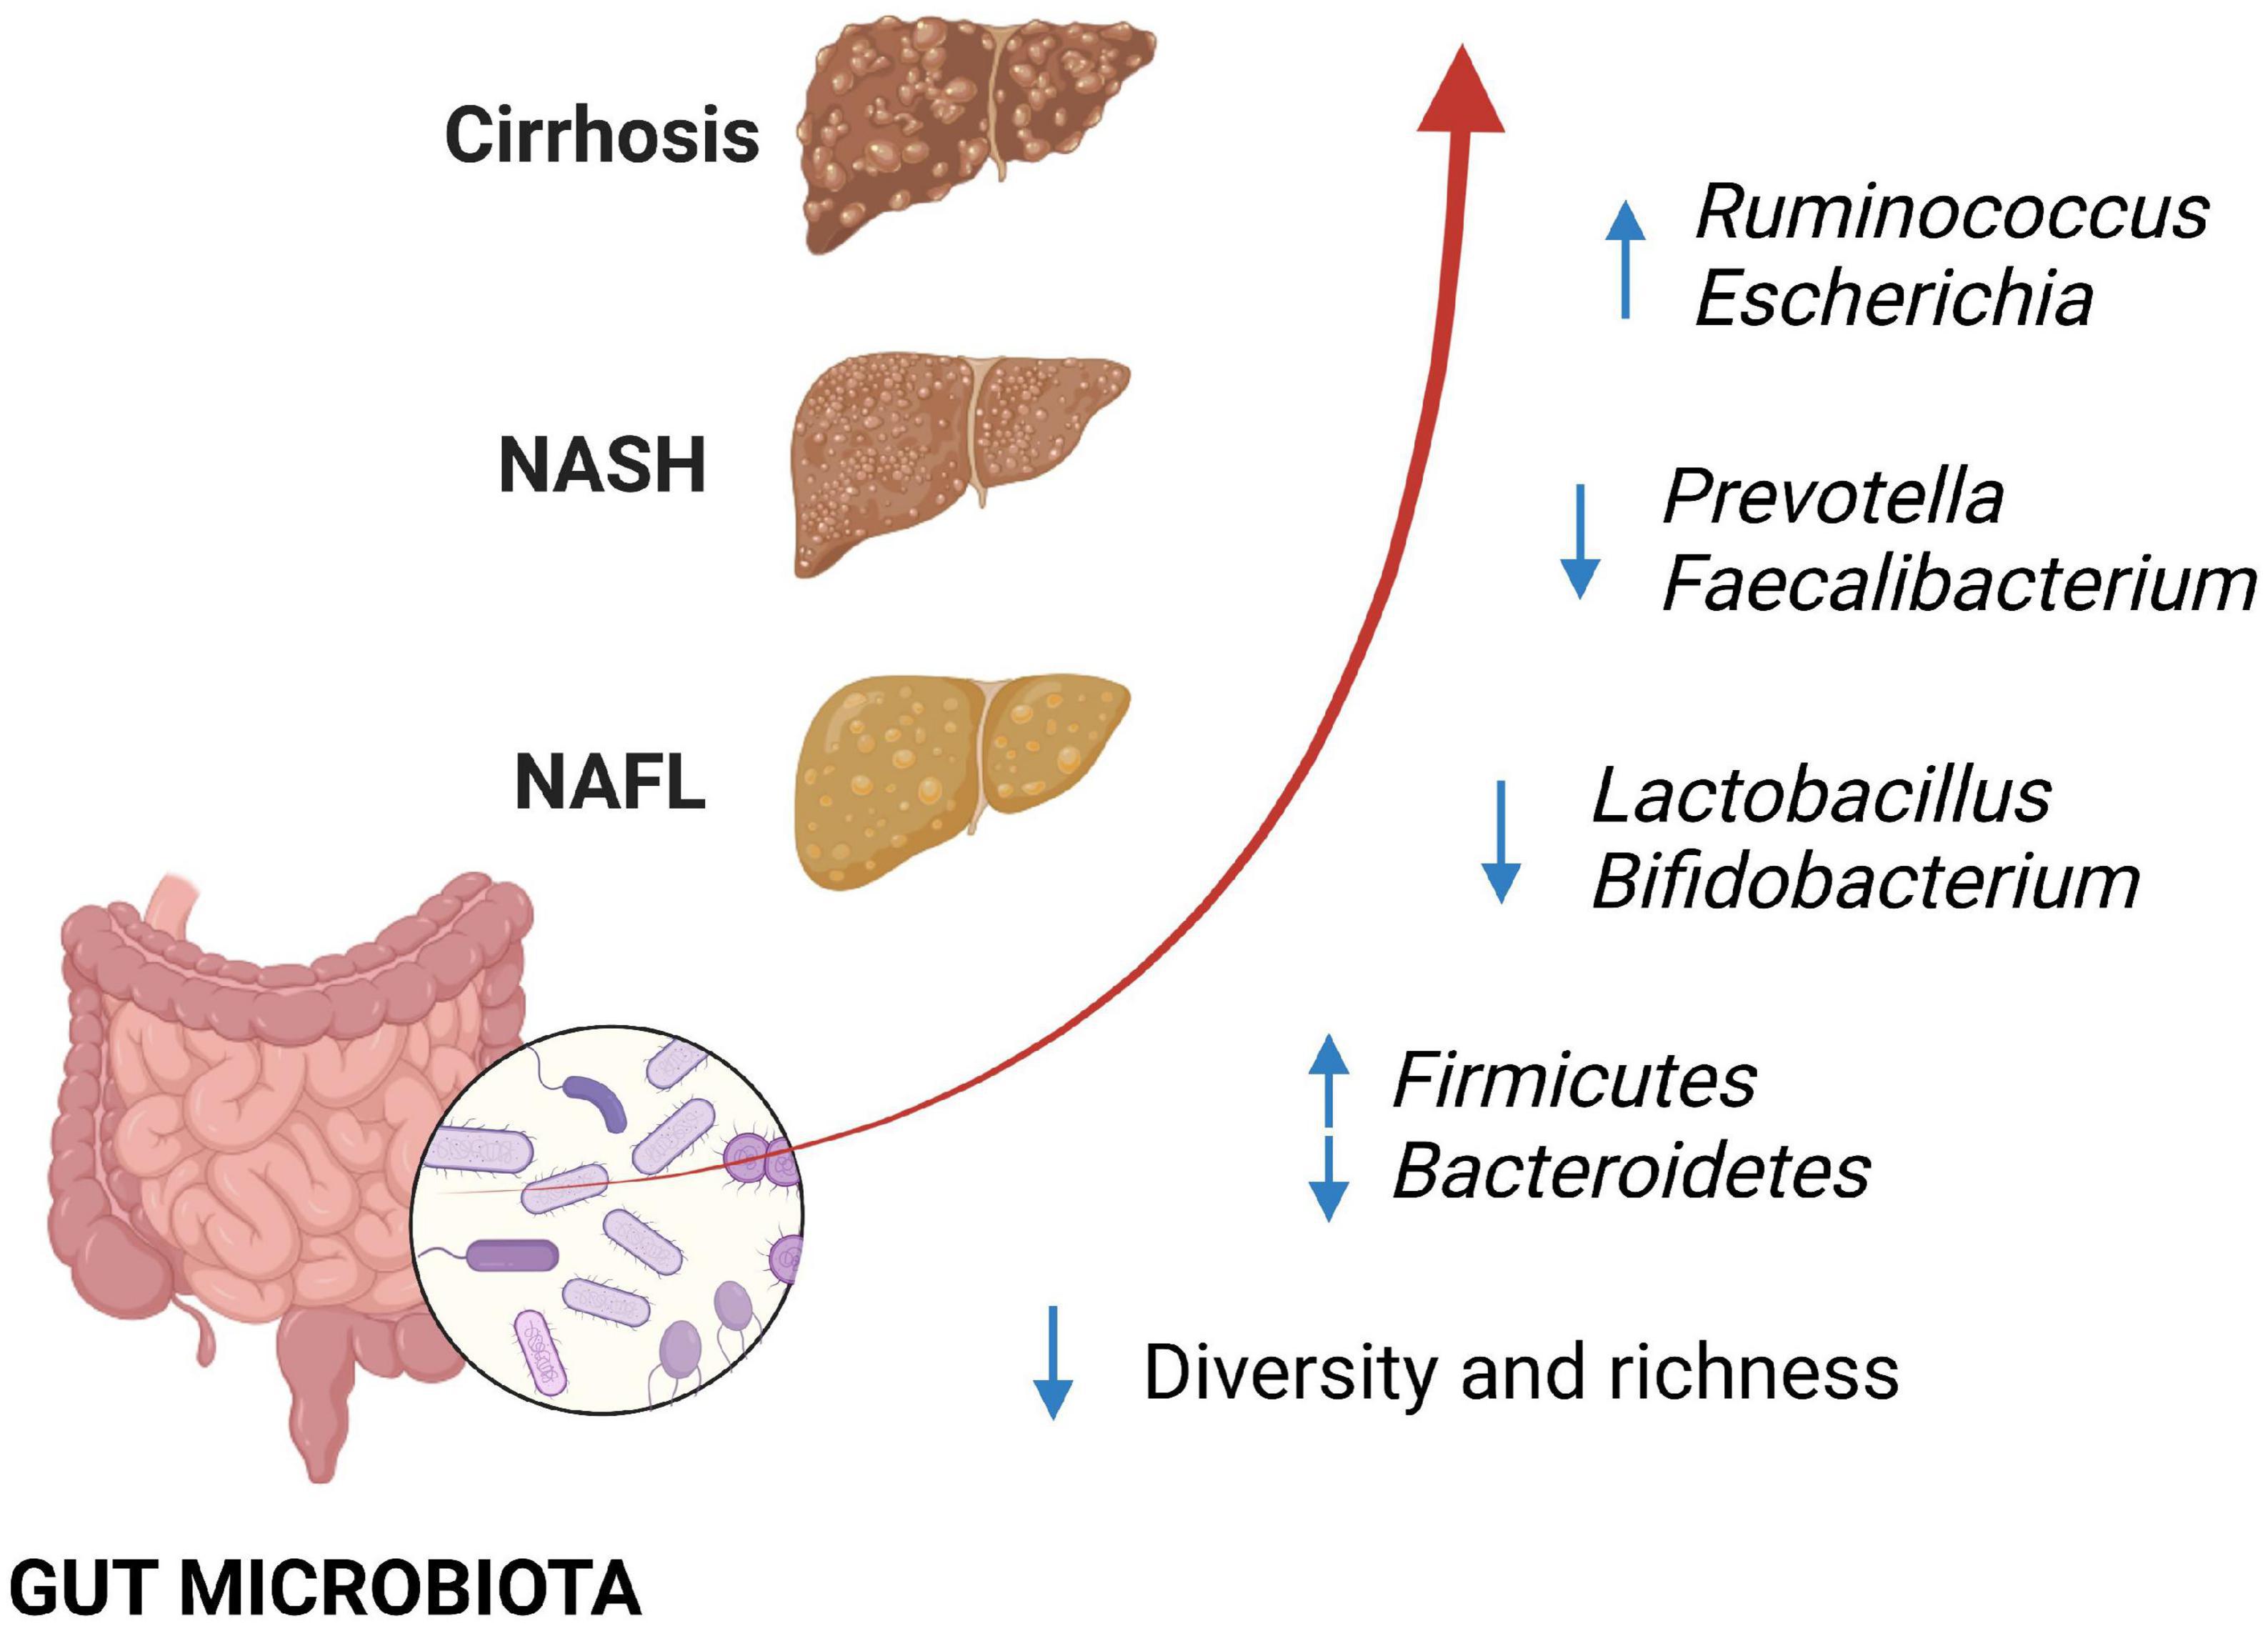 Gut microbiota modulation in patients with non-alcoholic fatty liver disease: Effects of current treatments and future strategies